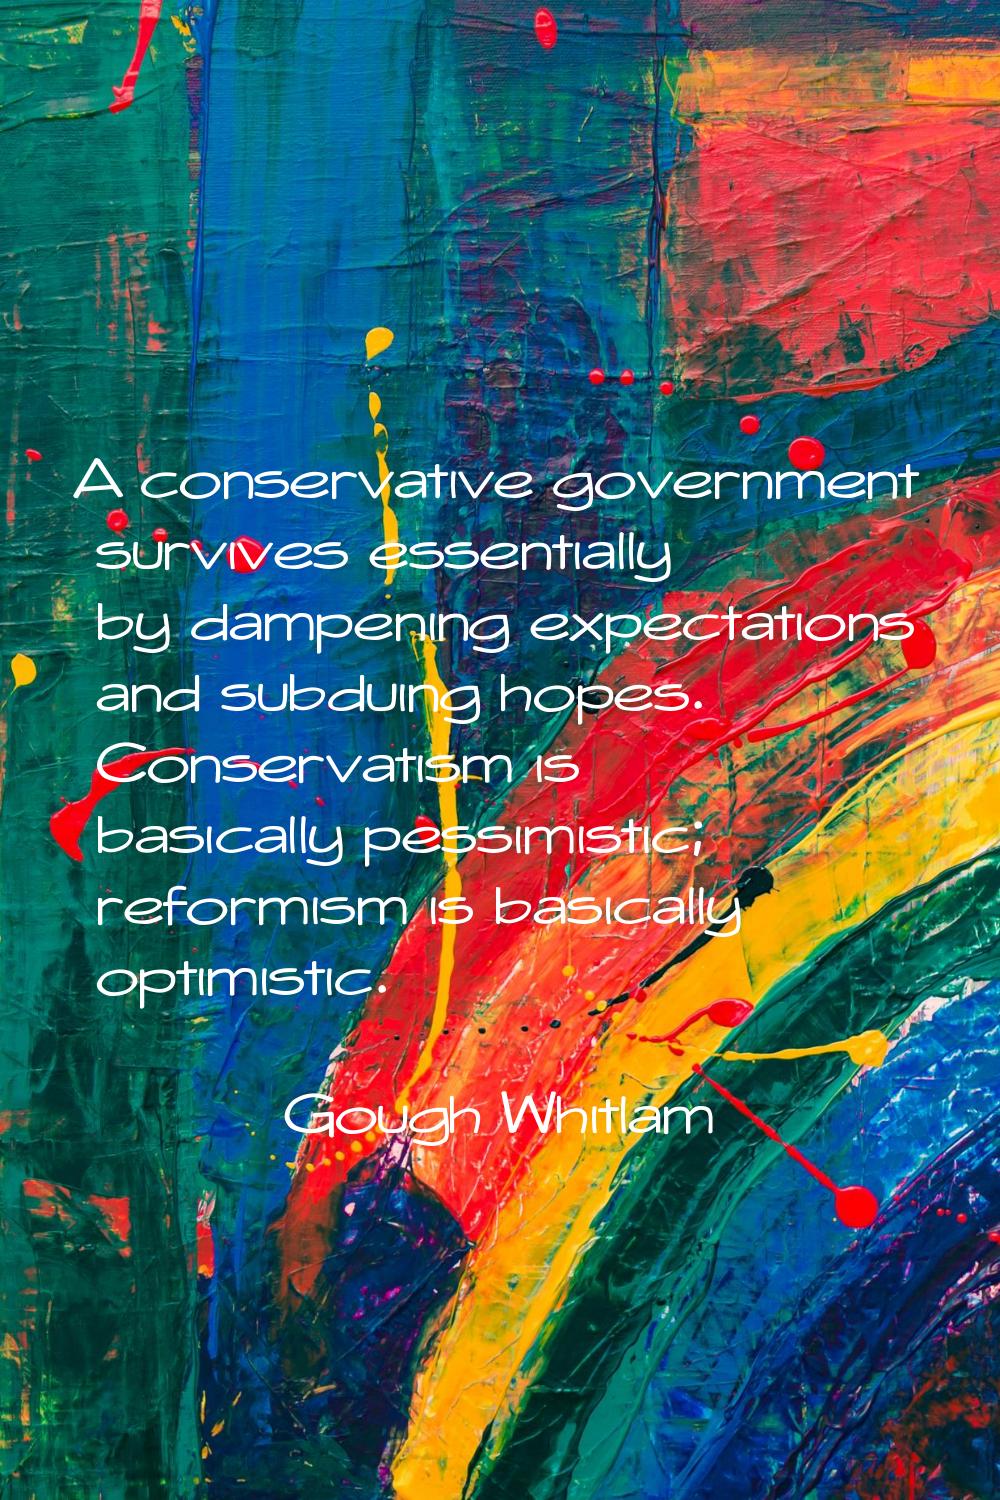 A conservative government survives essentially by dampening expectations and subduing hopes. Conser